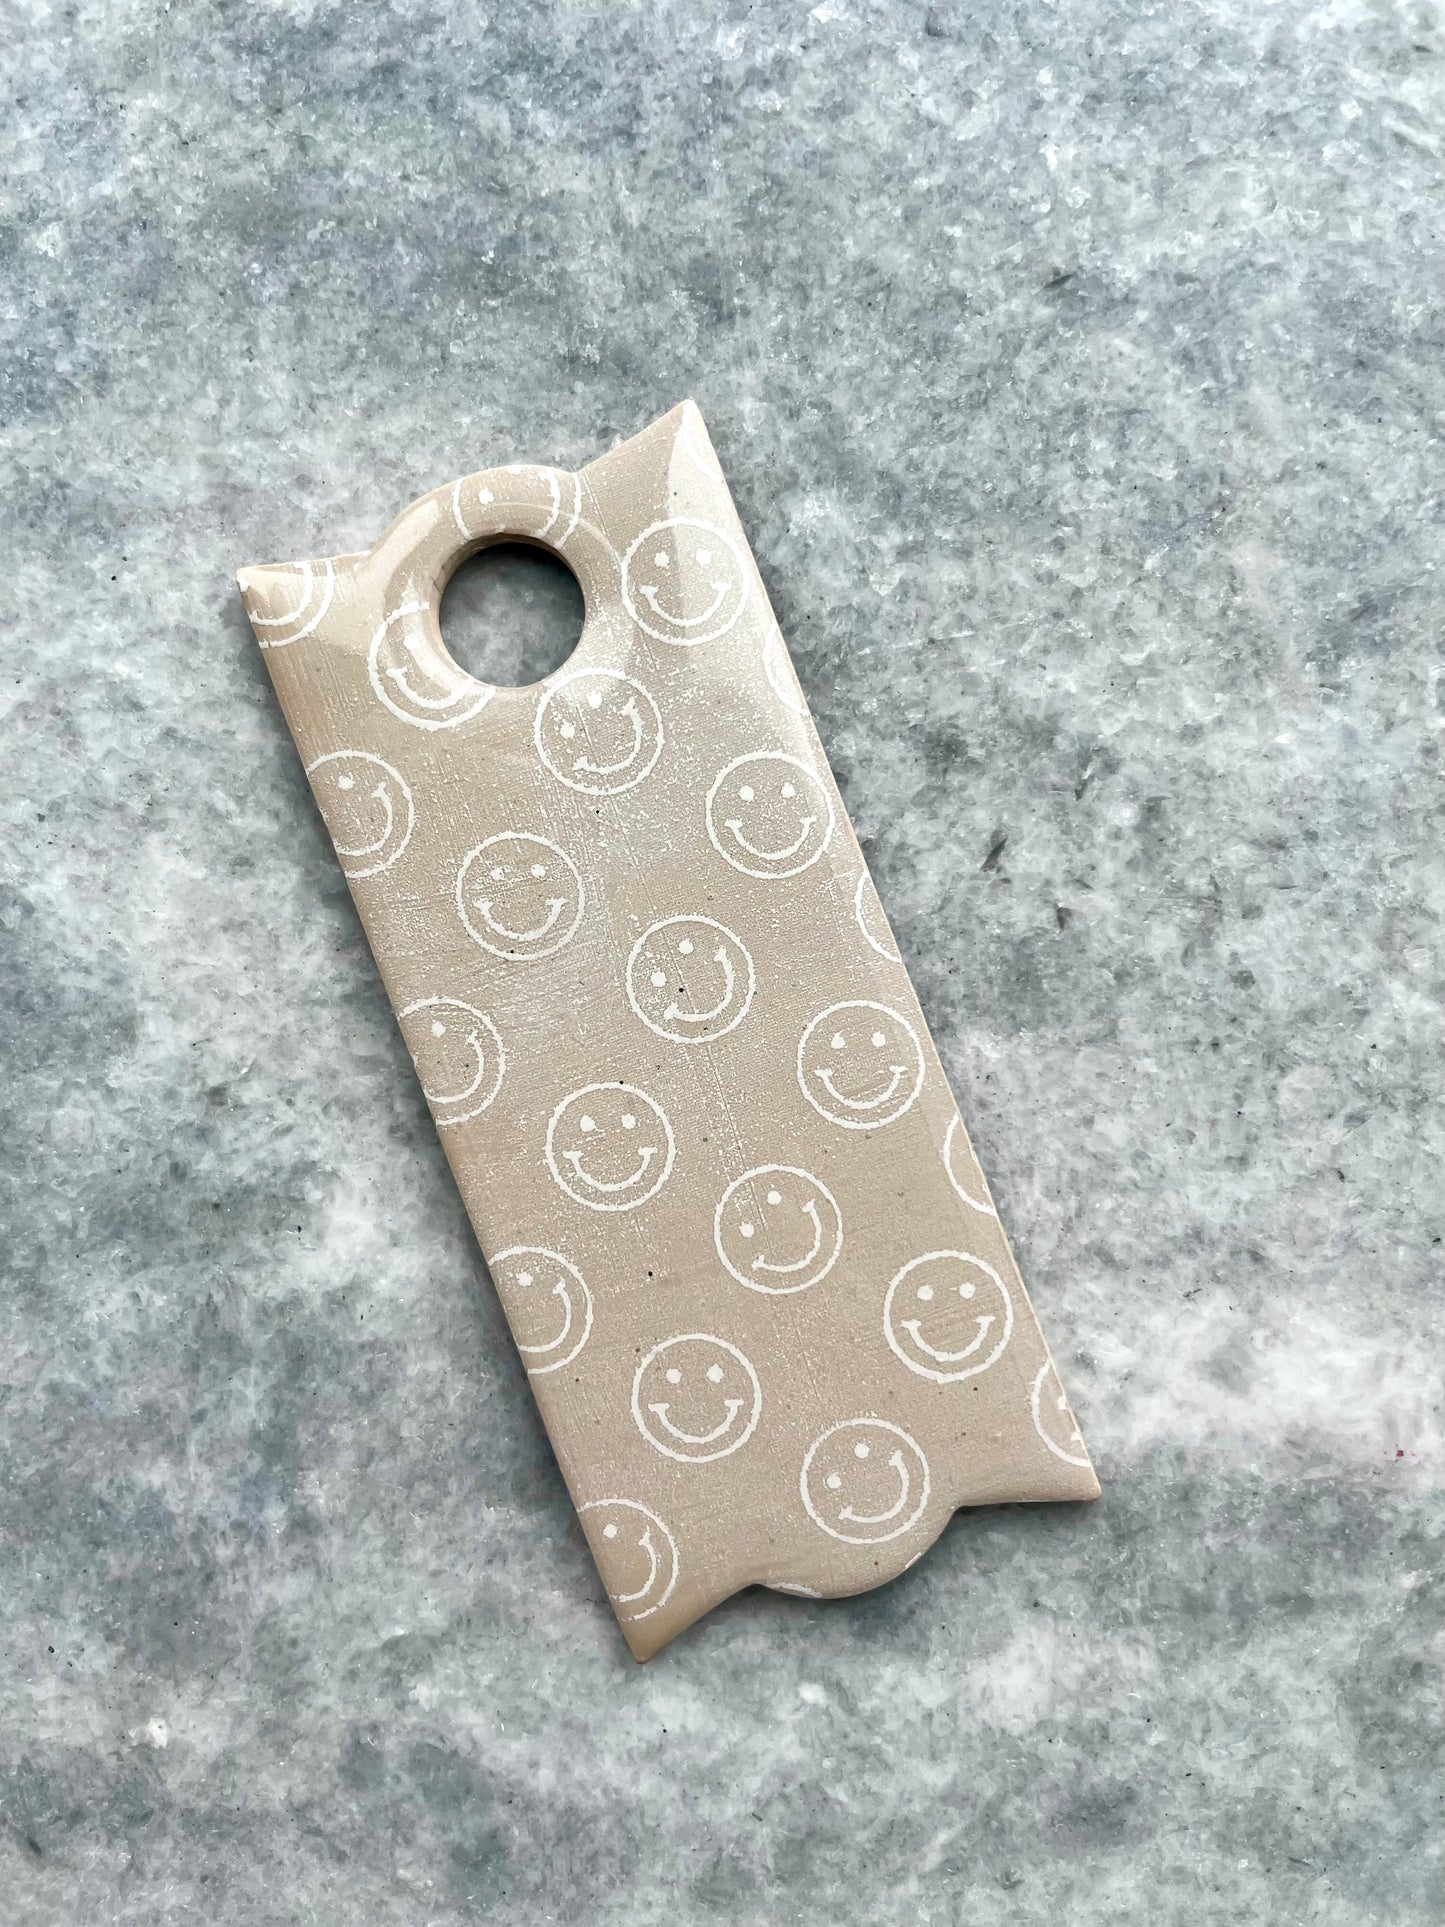 40 oz. Distressed happy face cup tag